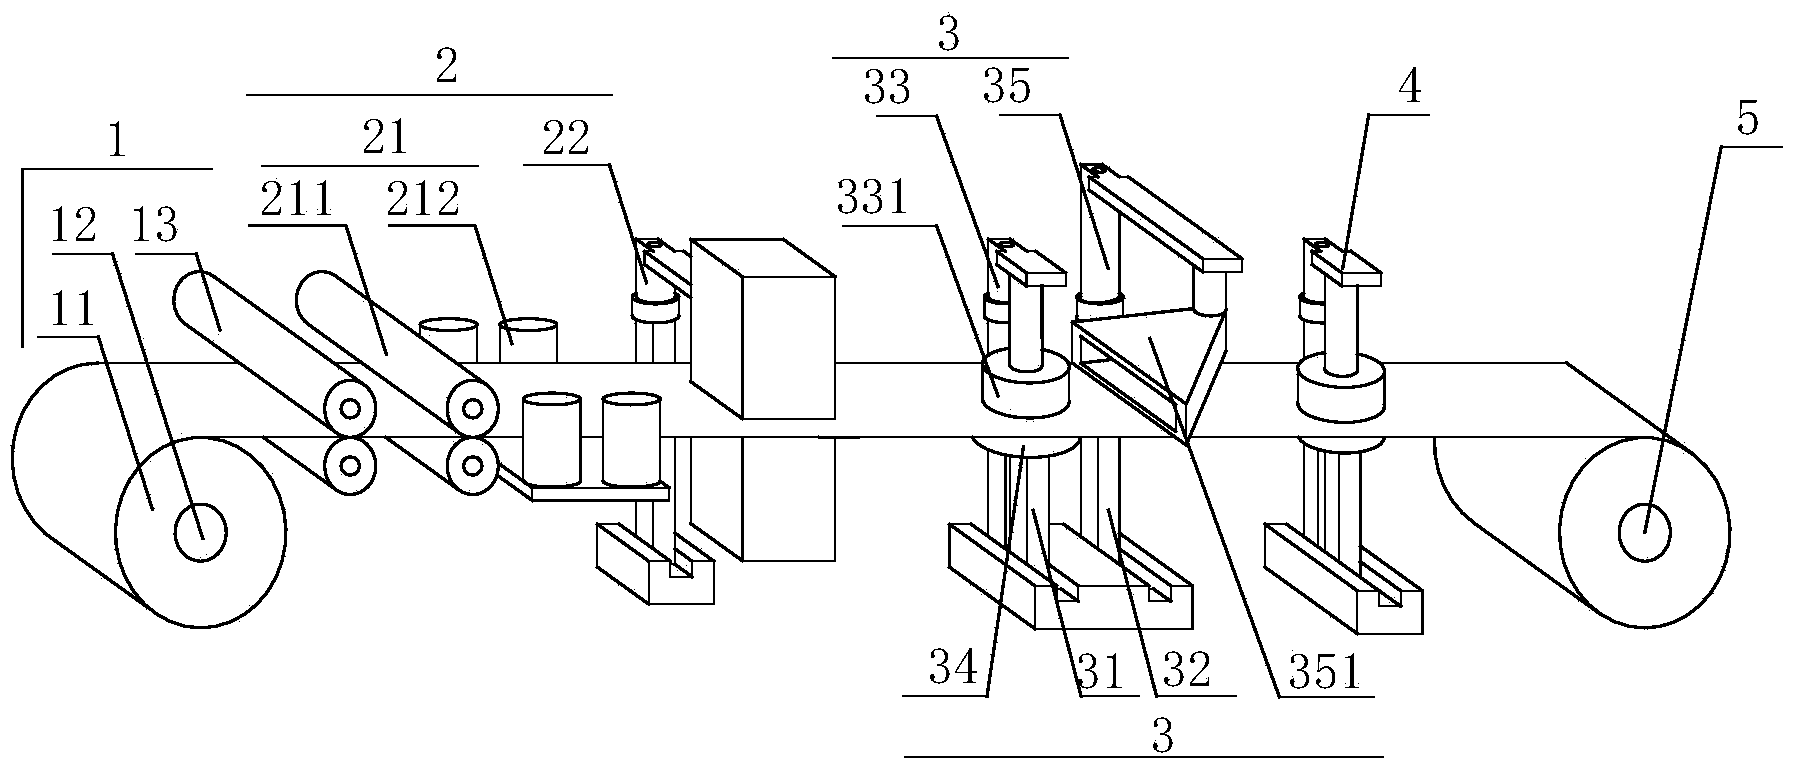 Strip steel surface rust removing apparatus